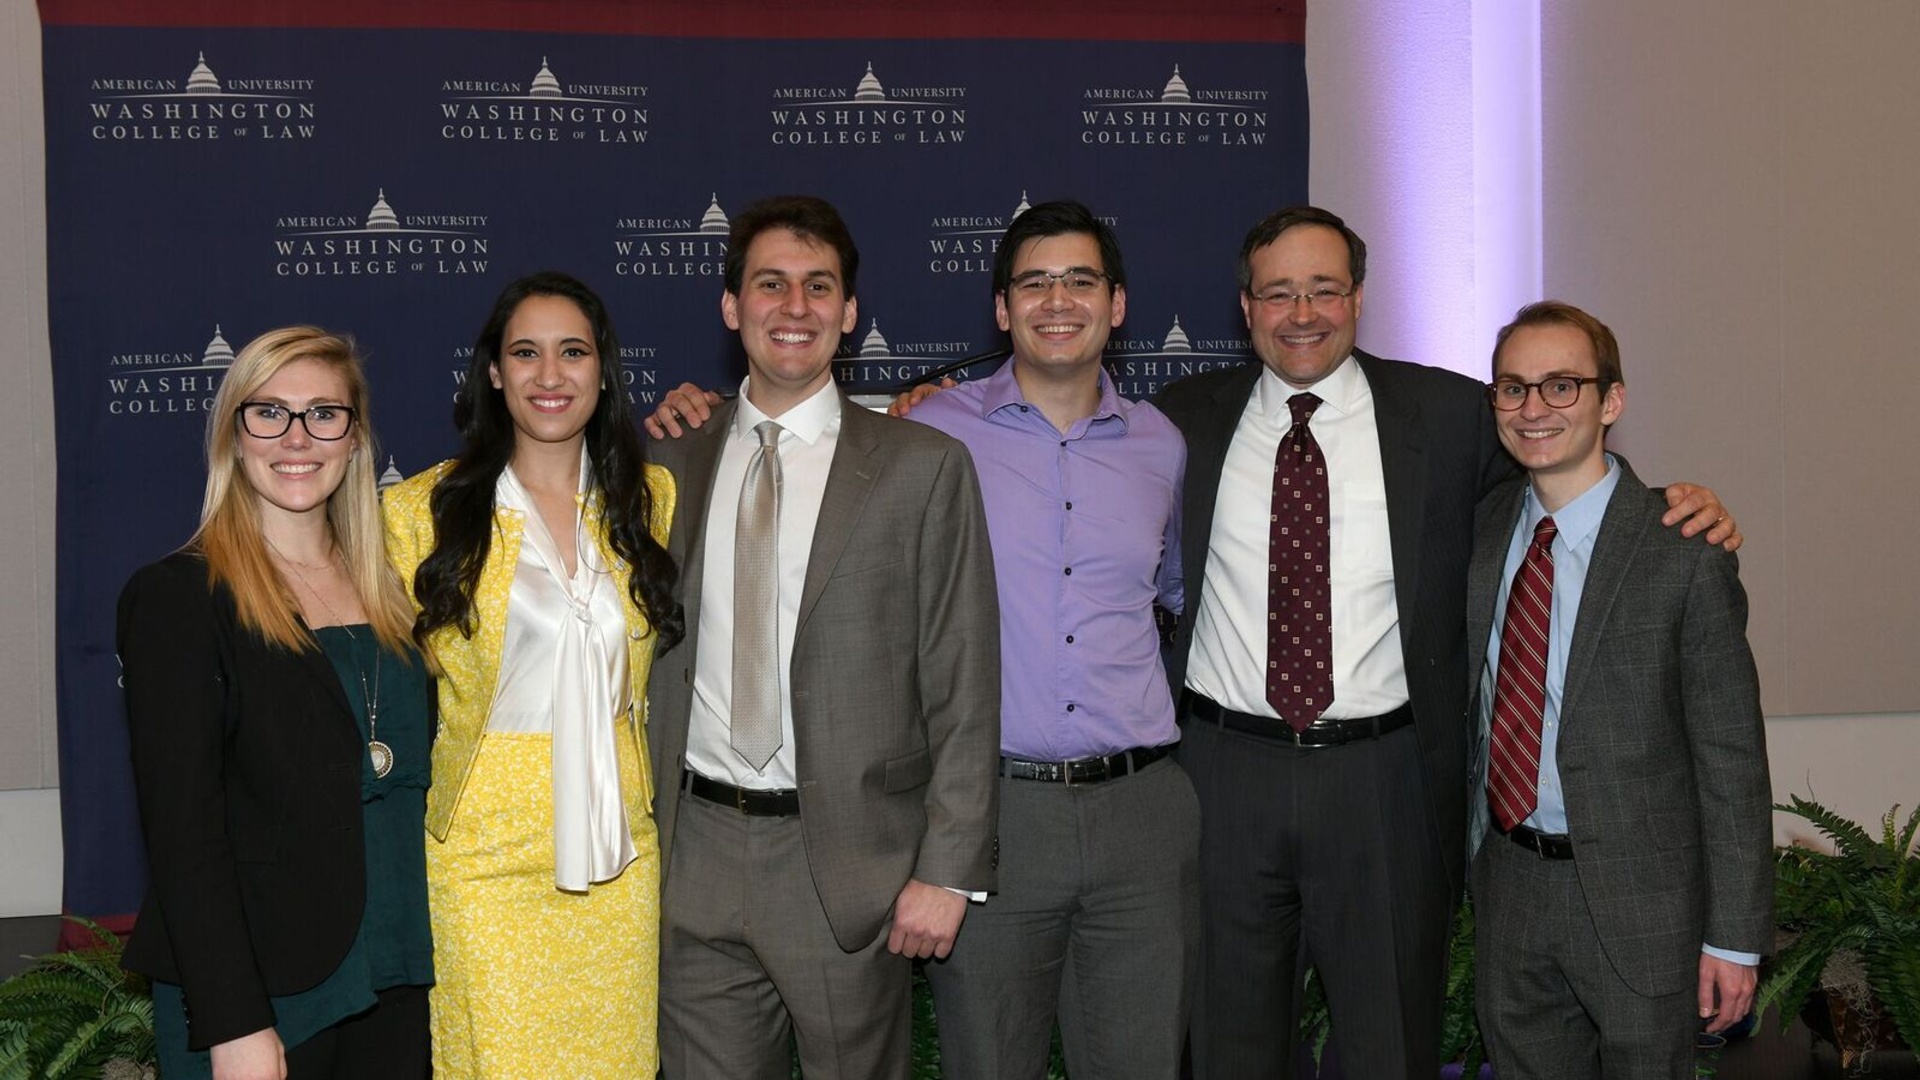 AUWCL's Program on Law and Government Celebrates 25 Years